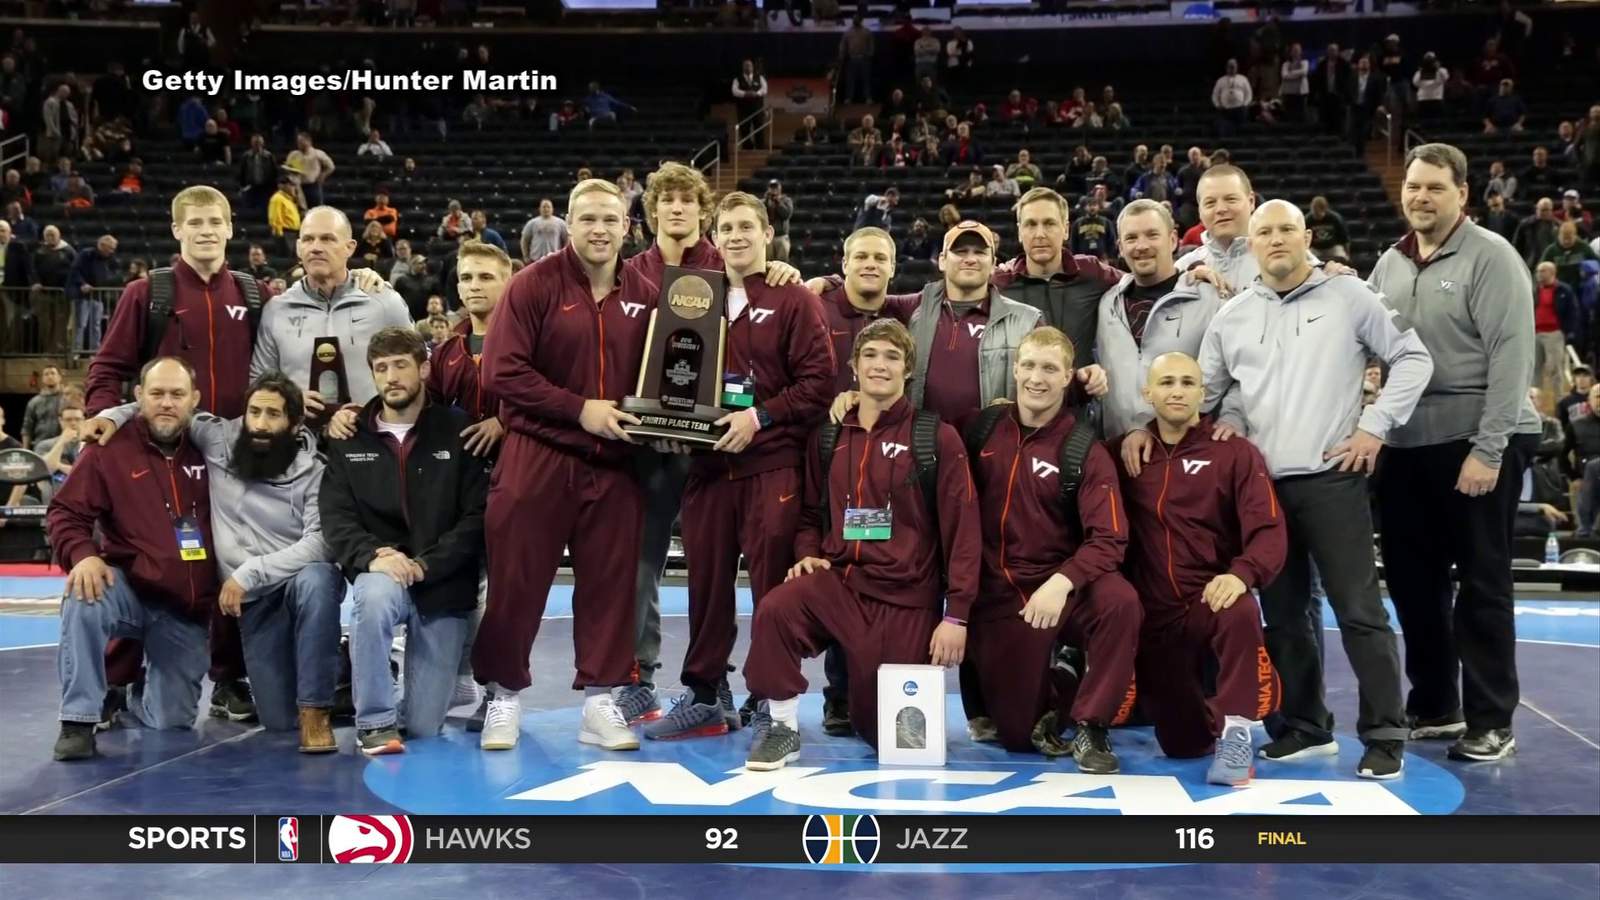 Virginia Tech grapplers ready to uphold “National Contender” status